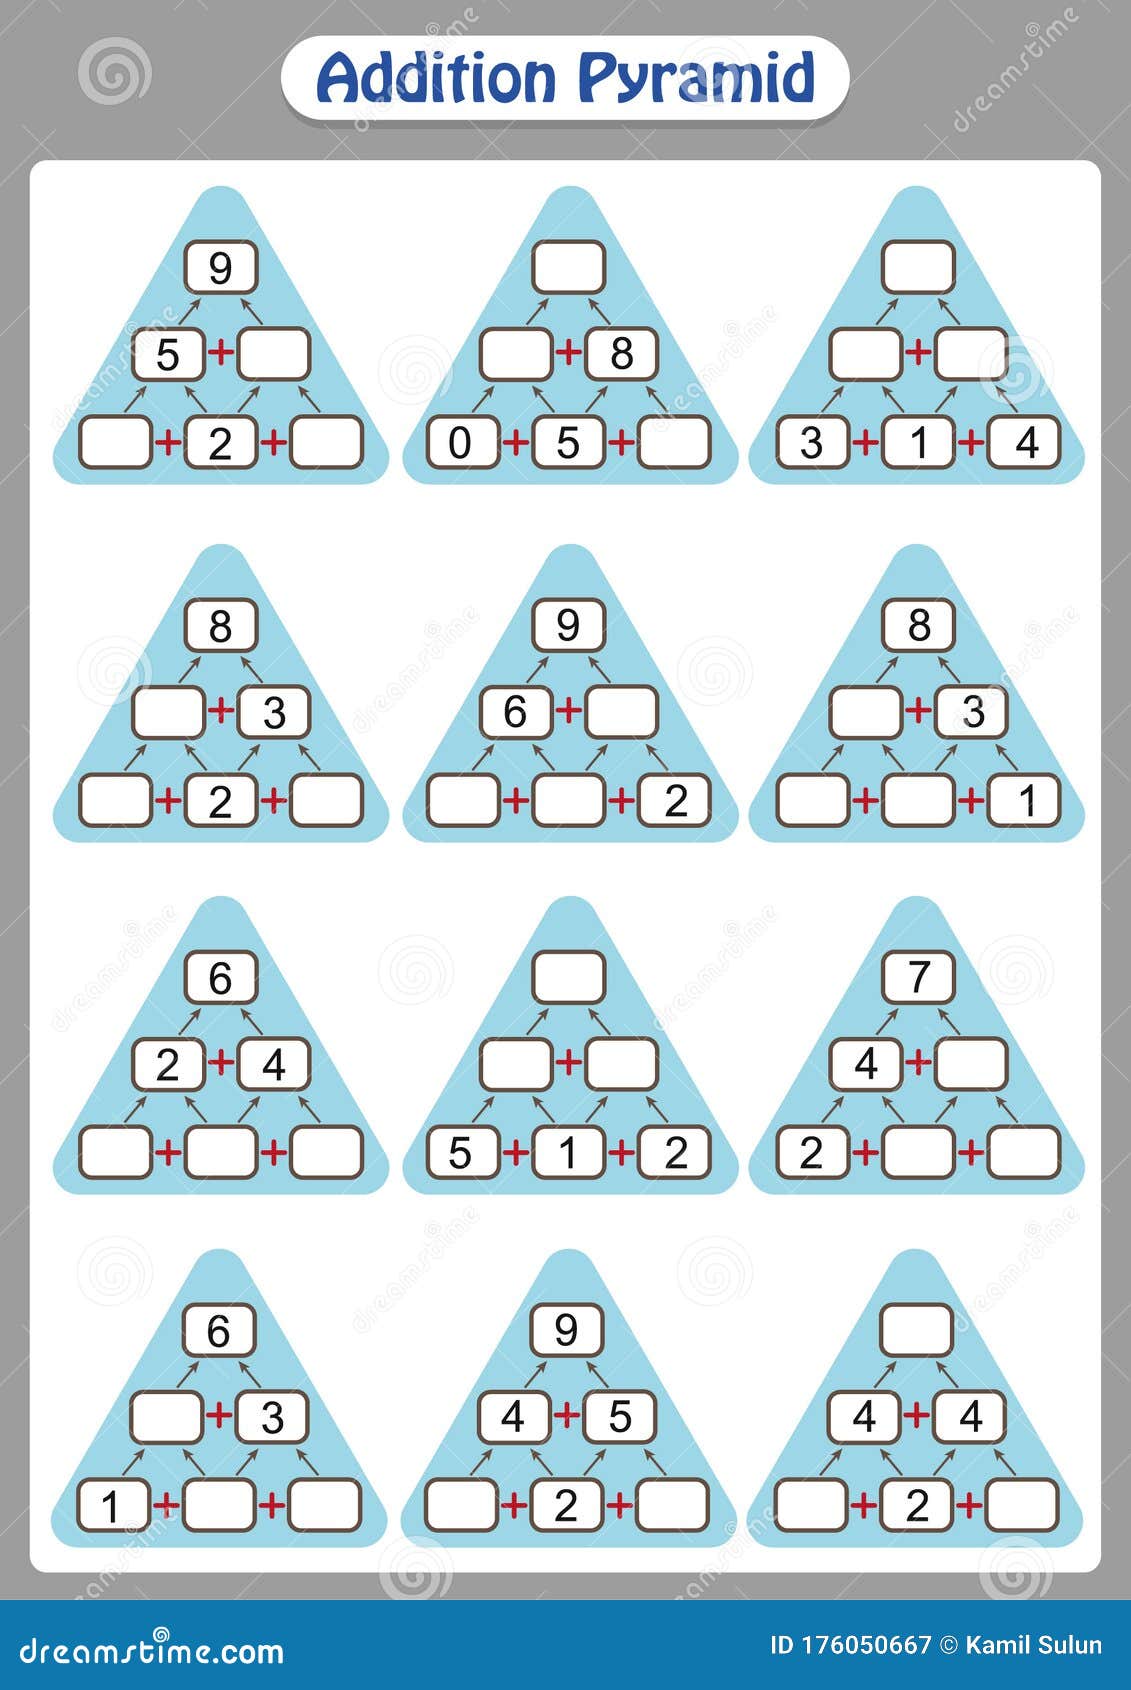 maths-pyramids-complete-the-missing-numbers-math-worksheet-for-kids-royalty-free-stock